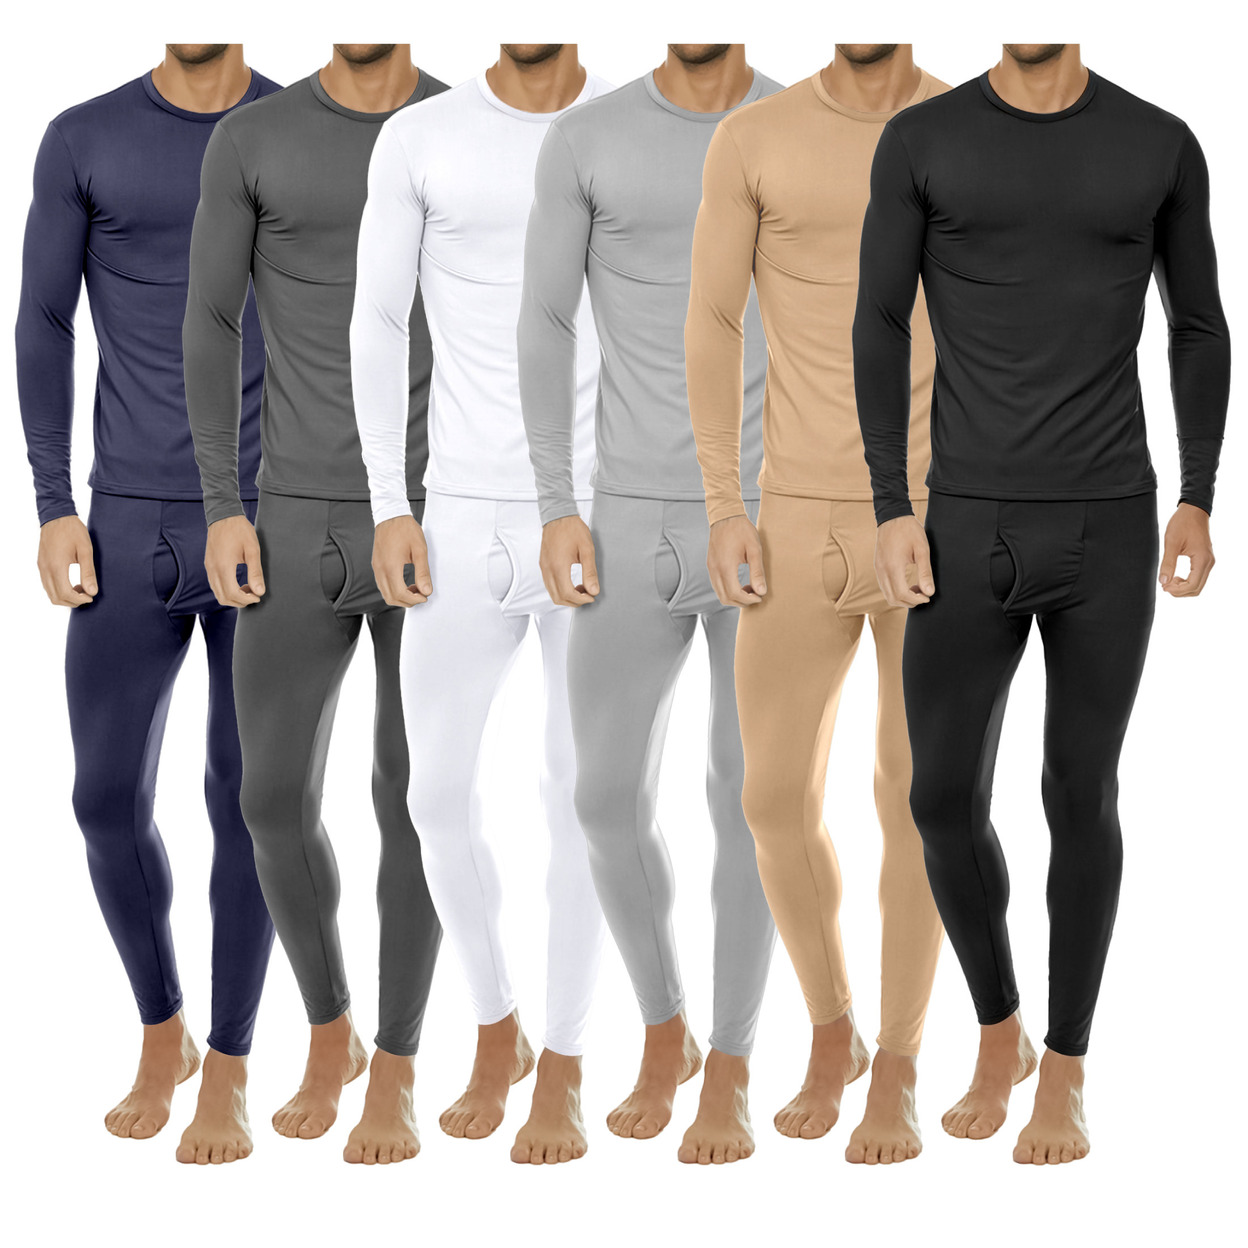 2-Pieces: Men's Winter Warm Fleece Lined Thermal Underwear Set For Cold Weather - Tan, Small